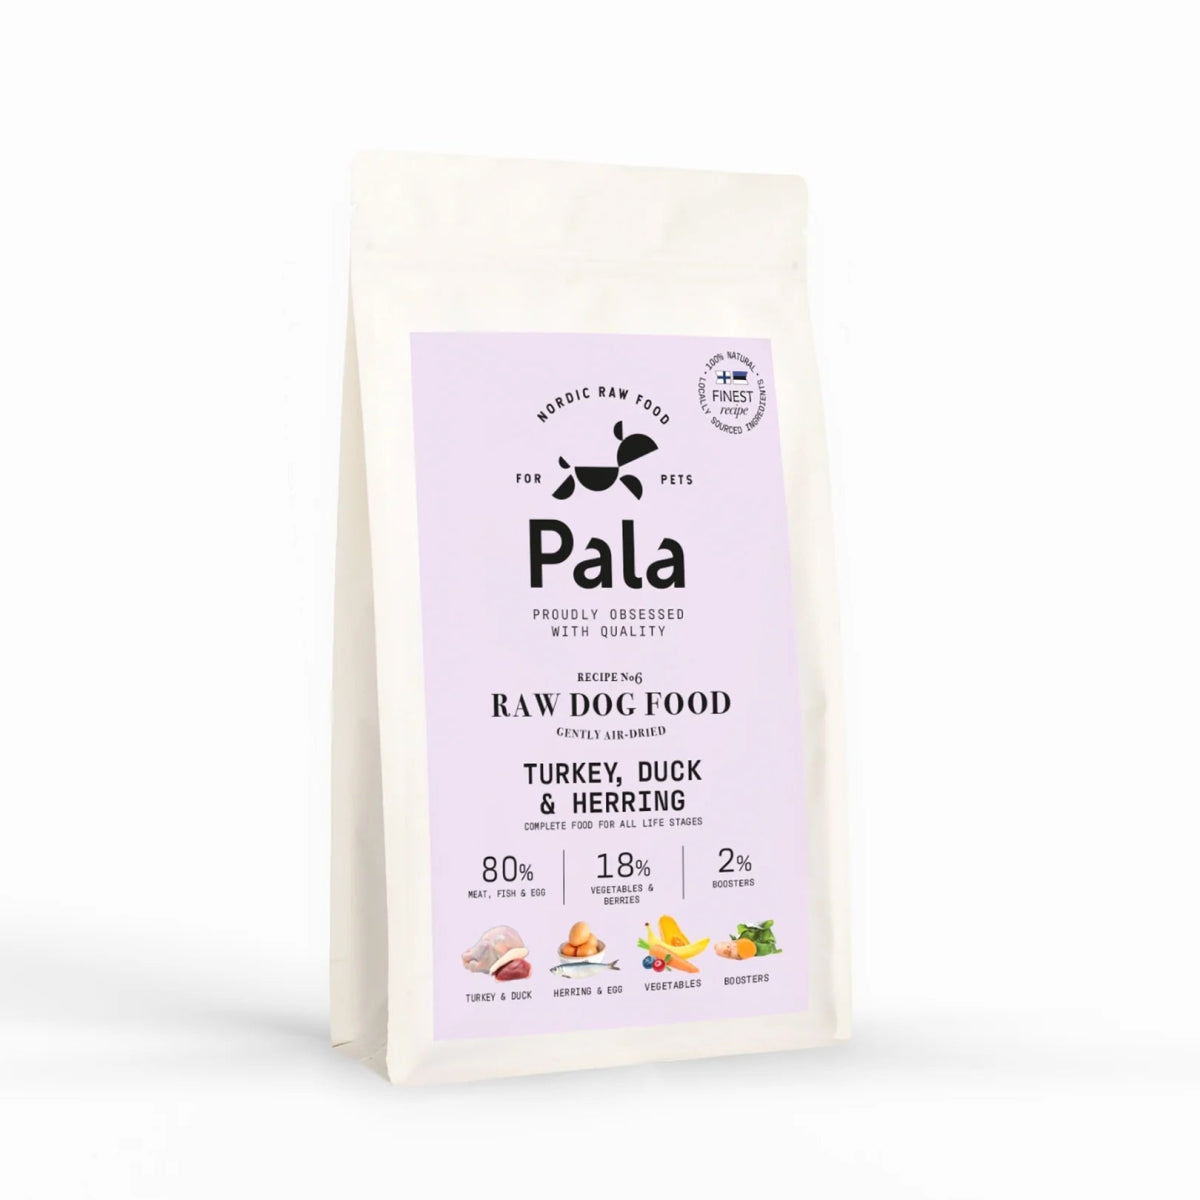 PALA RAW DOG FOOD, Turkey, Duck & Herring, 100% Natural Air-Dried Complete Food for Dogs - Okidogi.store